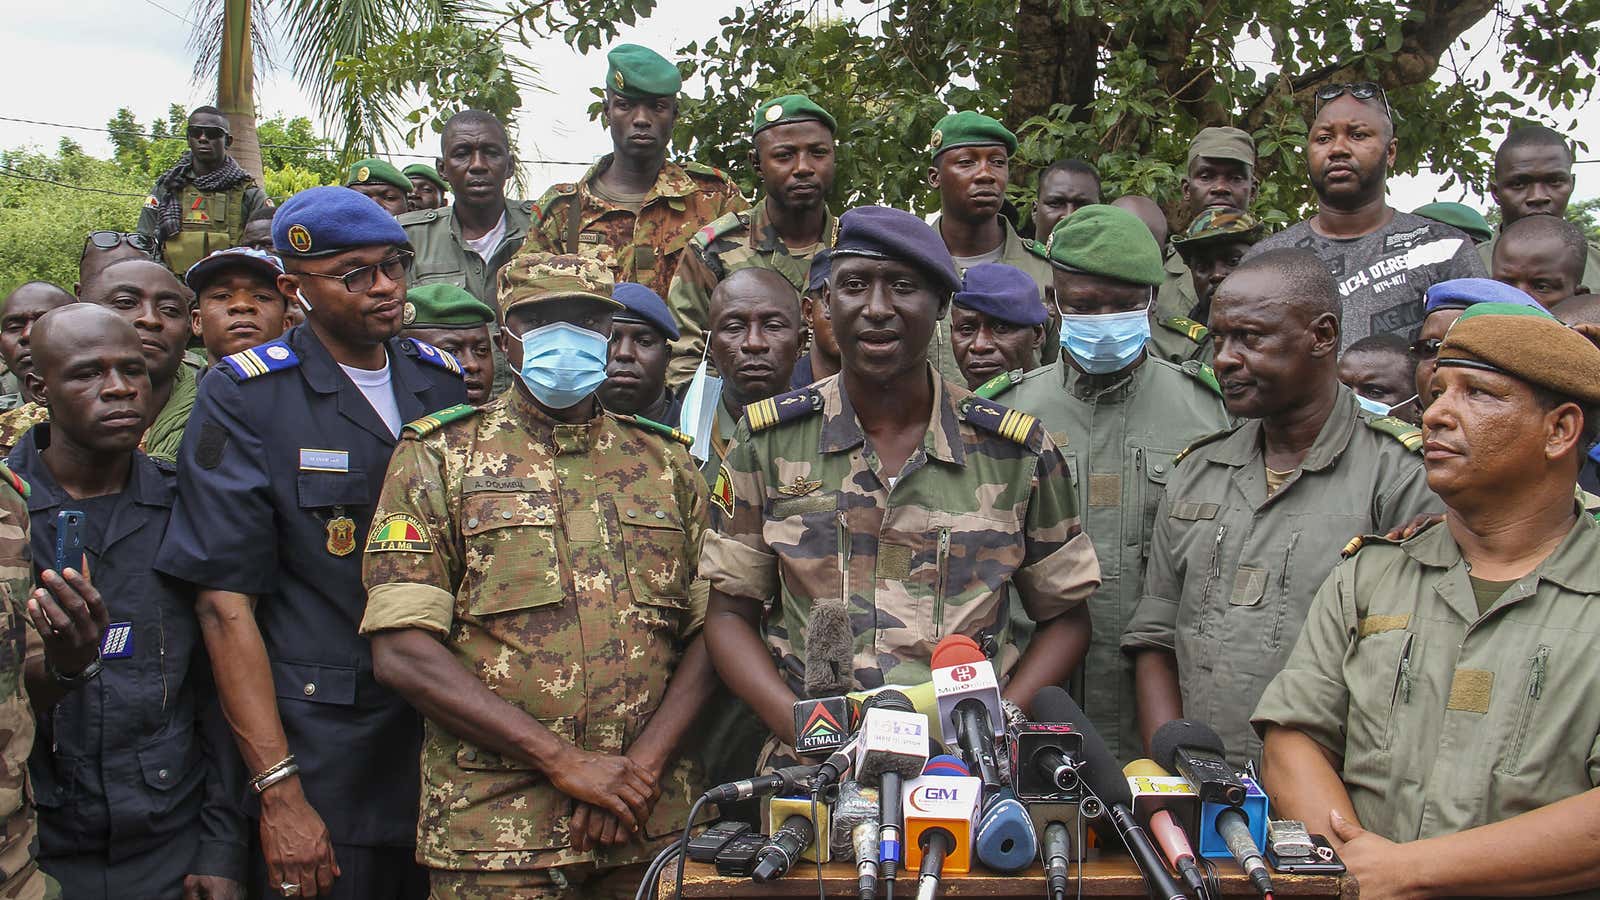 Colonel-Major Ismael Wague, centre, spokesman for the soldiers identifying themselves as National Committee for the Salvation of the People, speaks during a press conference at Camp Soudiata in Kati, Mali, Wednesday, Aug. 19, 2020